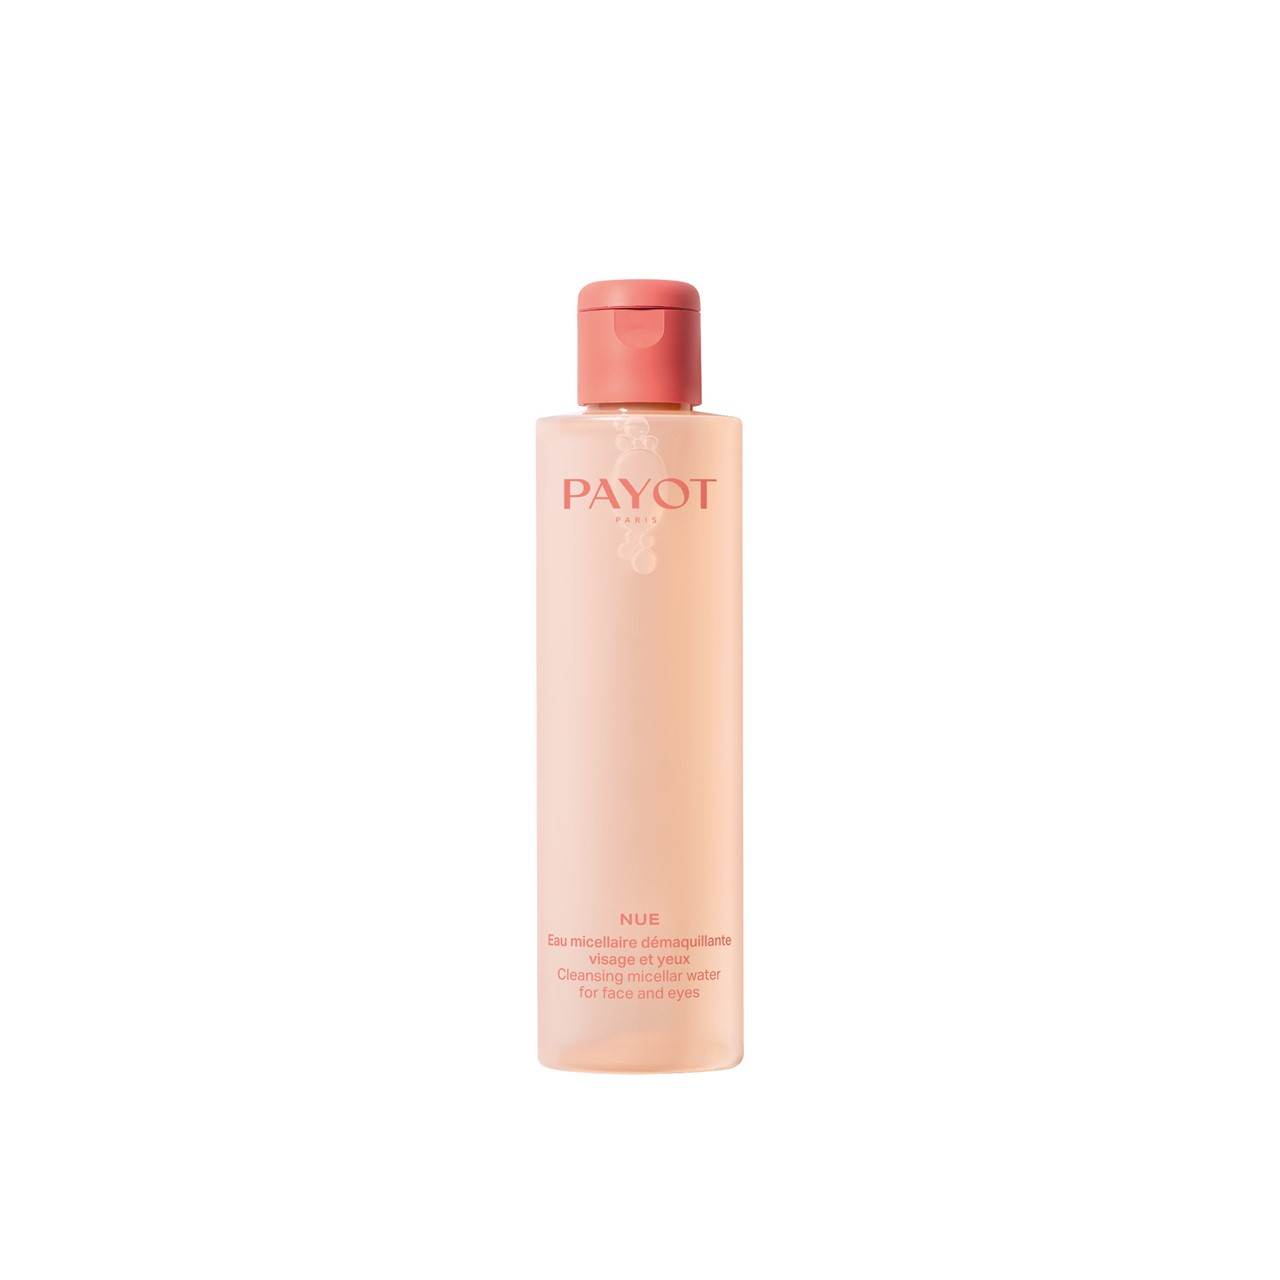 Payot Nue Cleansing Micellar Water For Face And Eyes 200ml